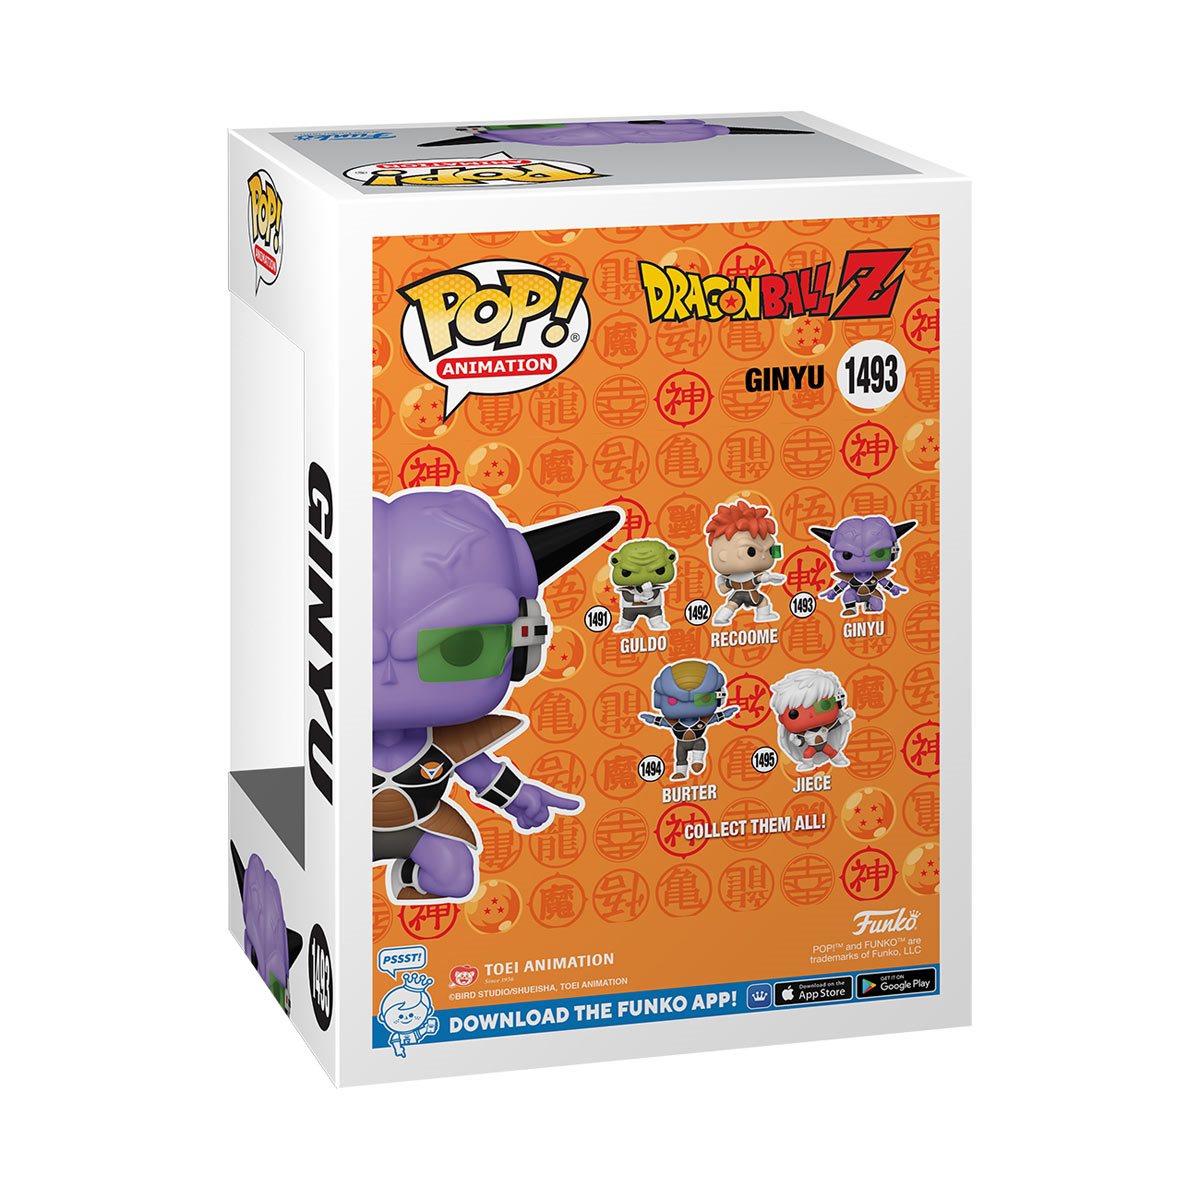 Dragon Ball Z Ginyu Glow-in-the-Dark Funko Pop! Vinyl Figure #1493 - Entertainment Earth Exclusive - Hyperdrive Collector Zone